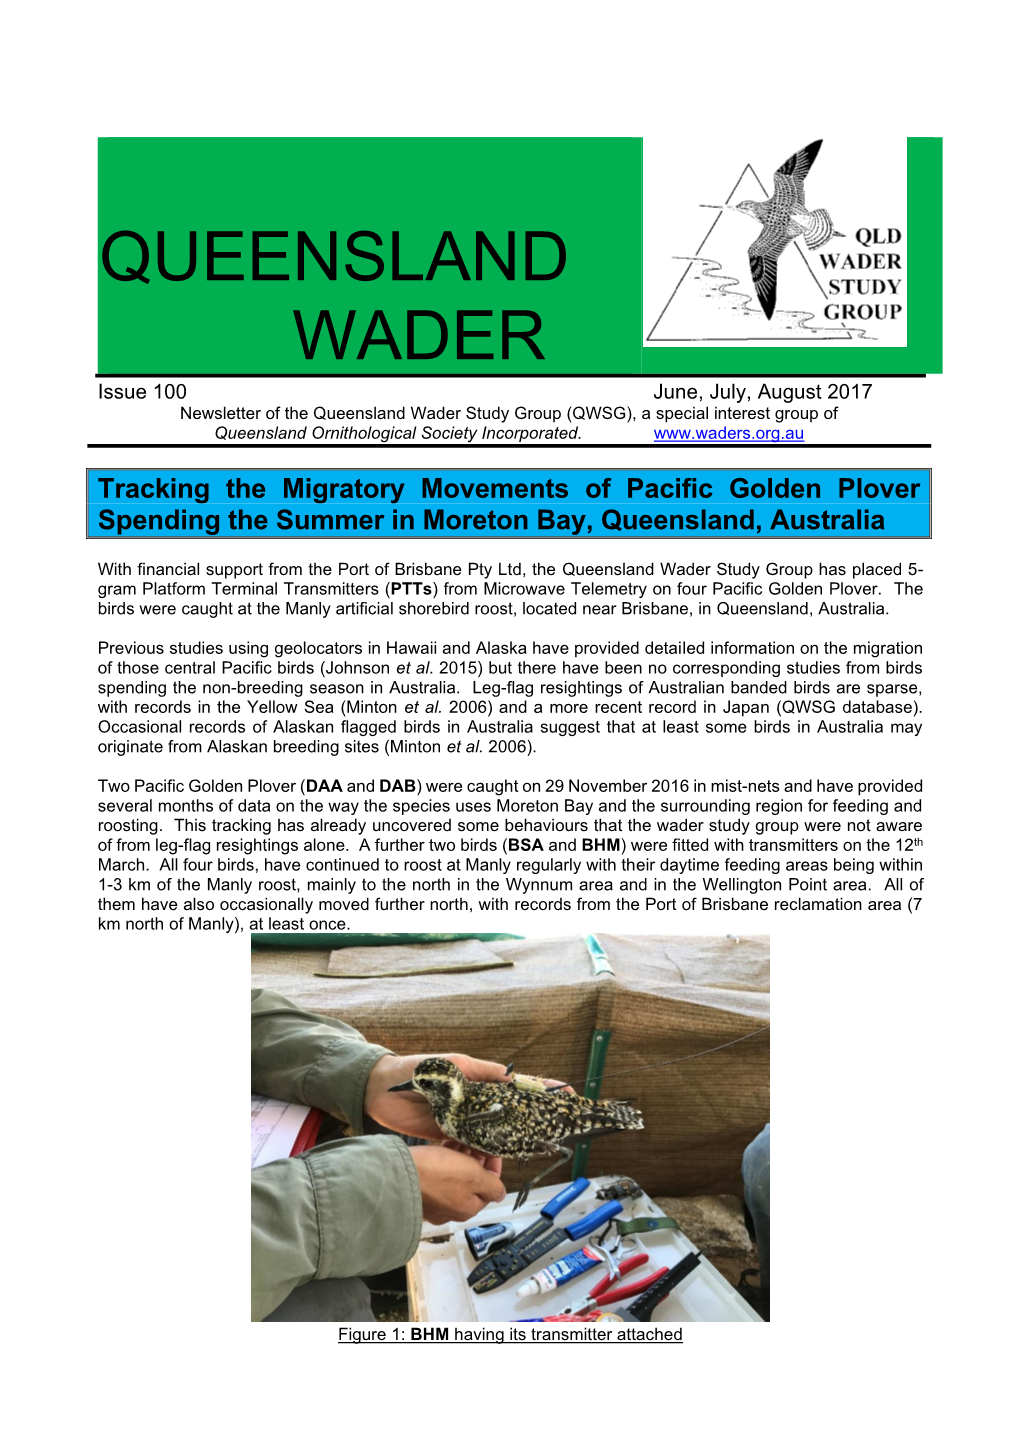 Queensland Wader Study Group (QWSG), a Special Interest Group of Queensland Ornithological Society Incorporated